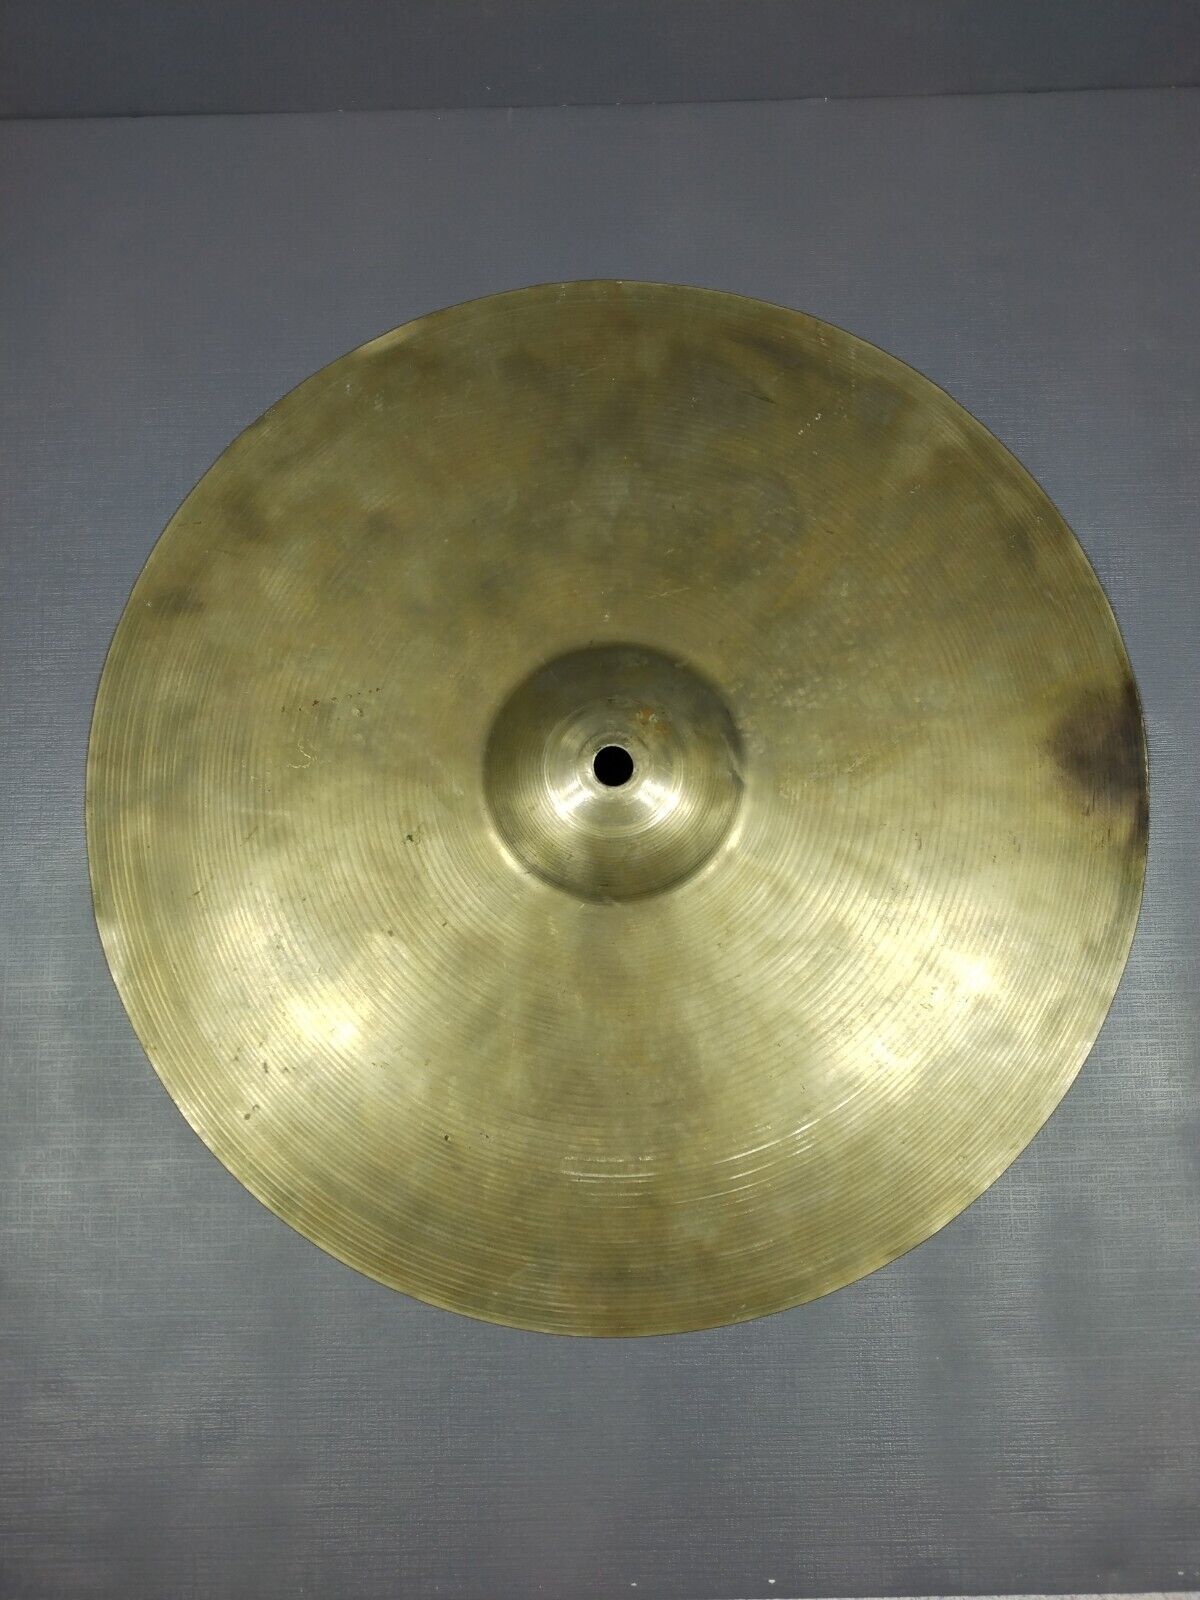 Vintage Meinl Ambico 14" Crash Cymbal 1960's Likely Nickel Silver West Germany